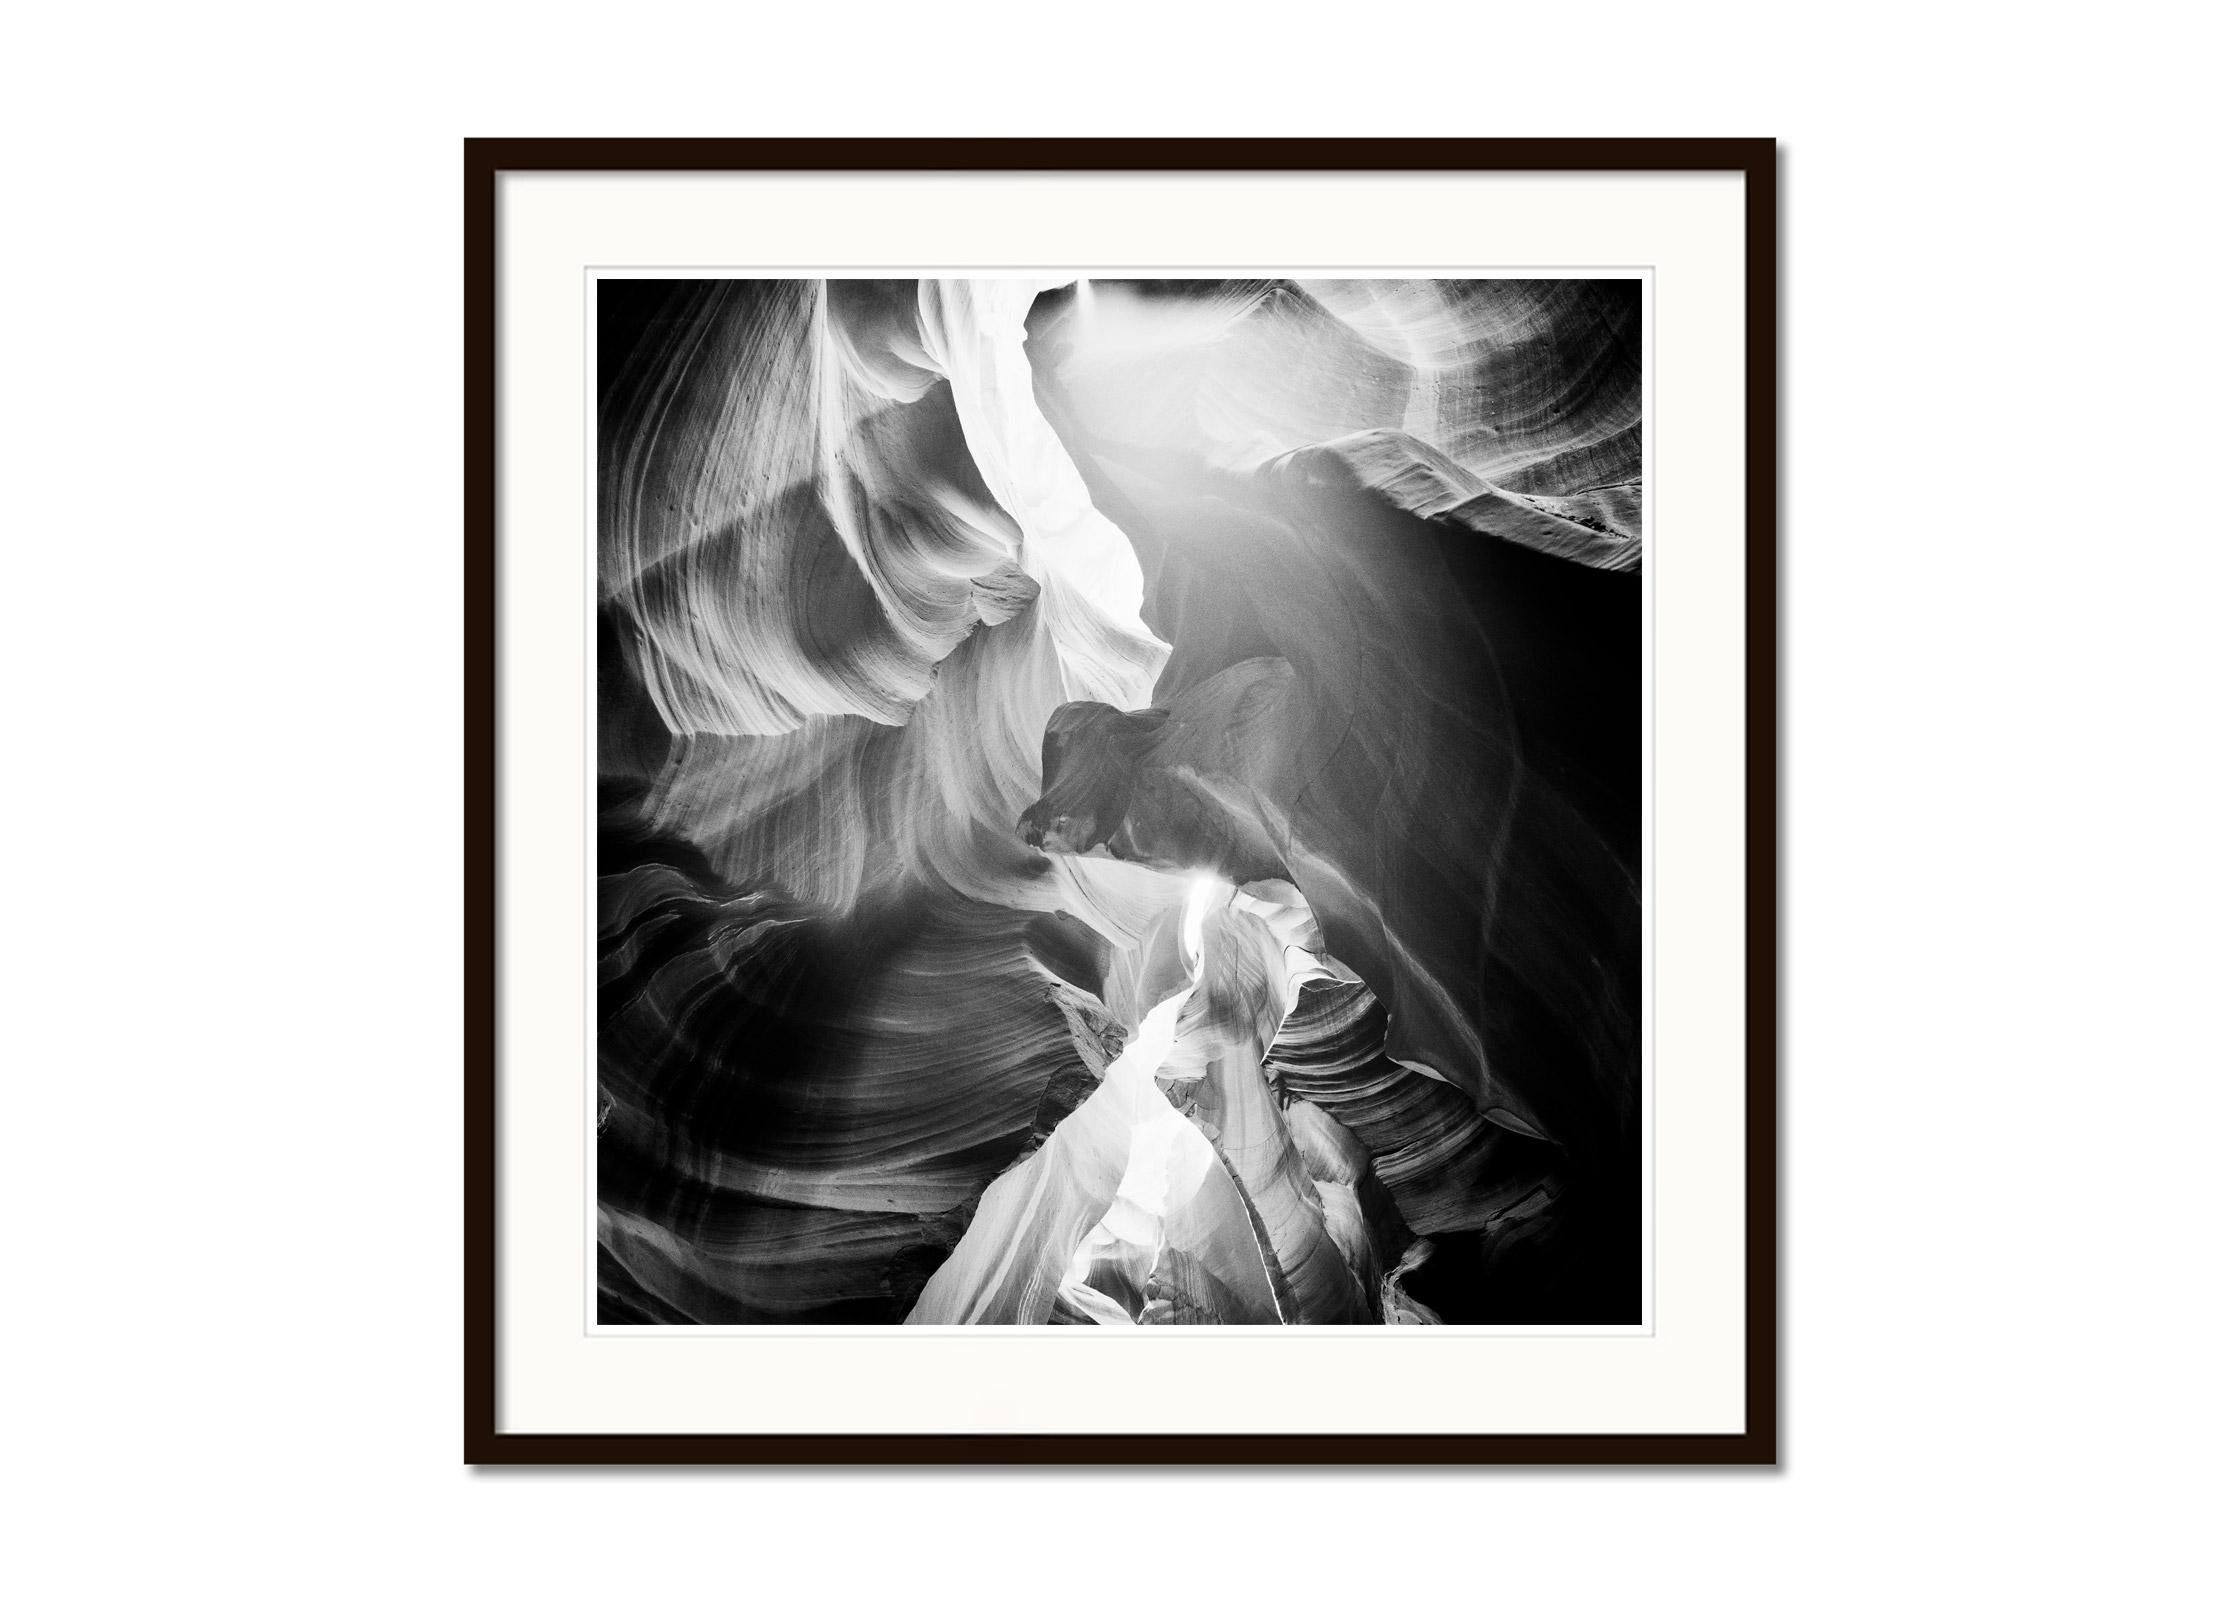 Black and white fine art landscape photography. Stone formation from Antelope Canyon in the desert near Page, Arizona, USA. Archival pigment ink print as part of a limited edition of 9. All Gerald Berghammer prints are made to order in limited